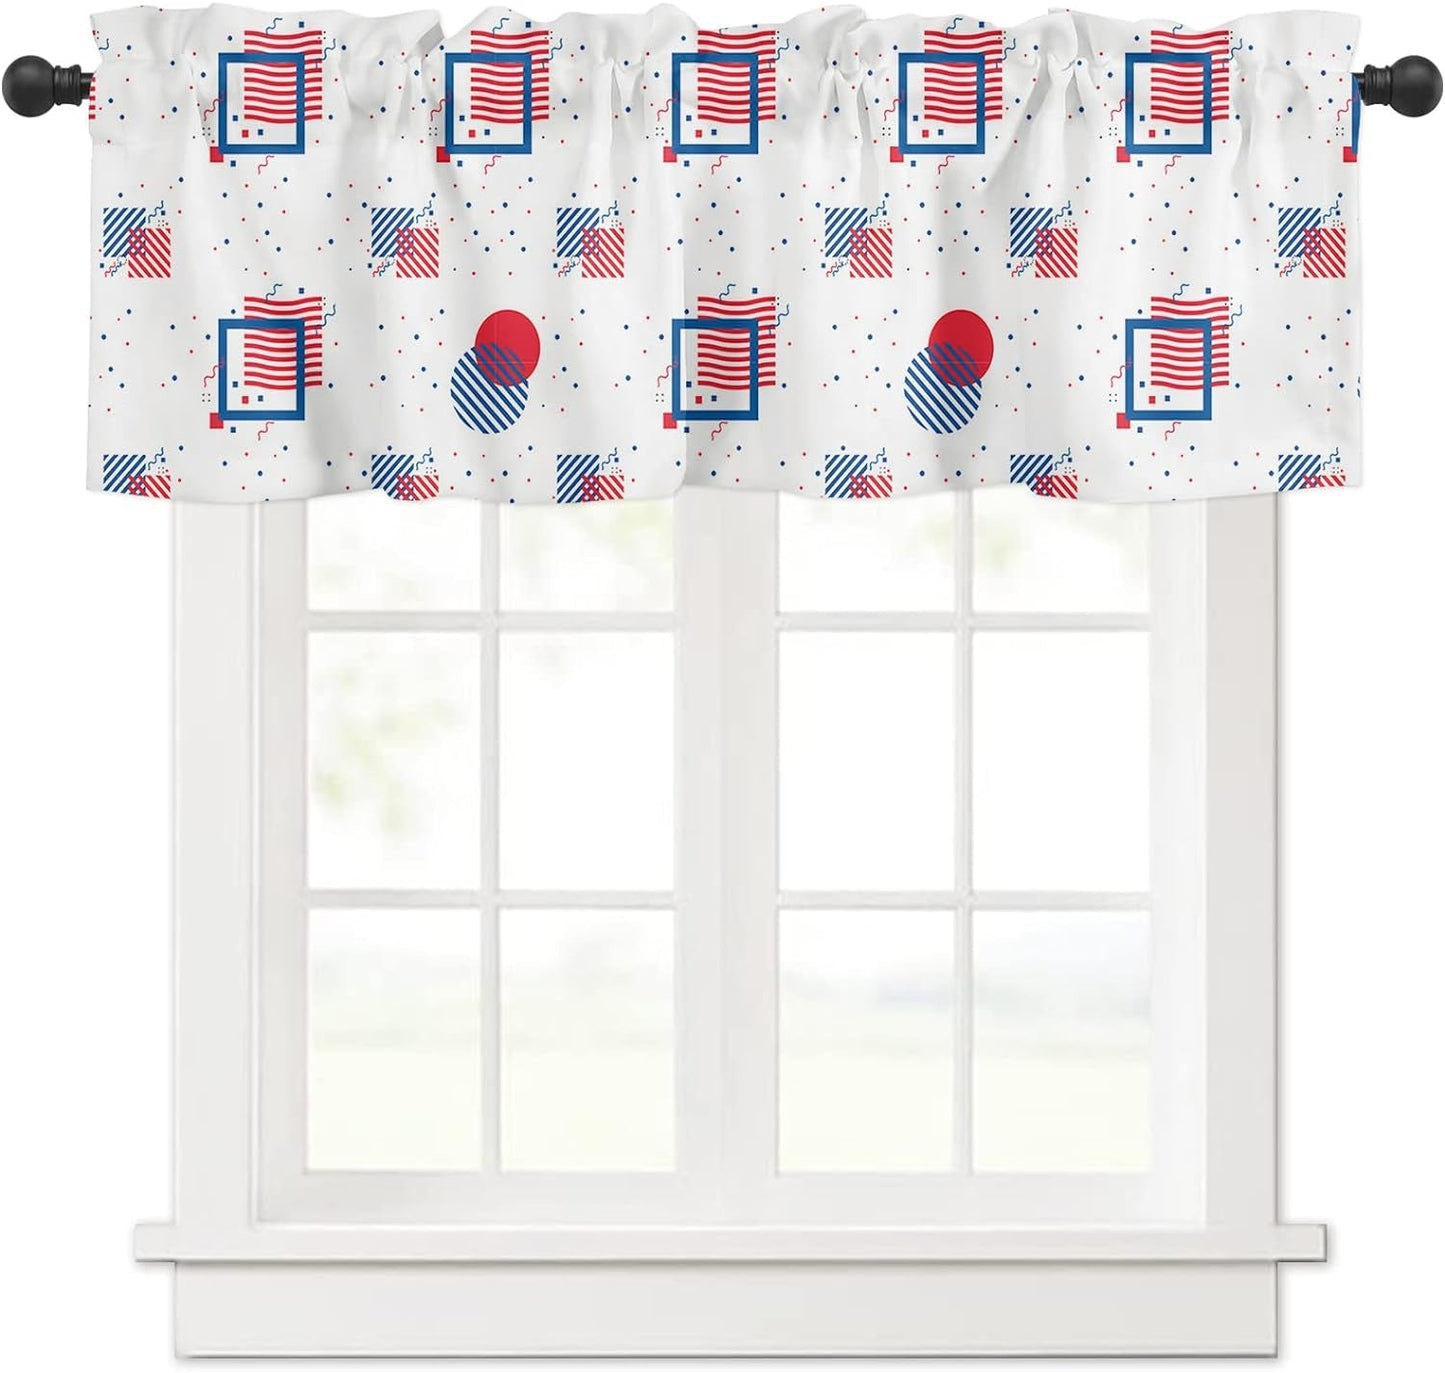 Curtain Valance, Independence Day Fireworks Texture Star Blue 4Th of July Rod Pocket Valance Short Window Treatment Decor Curtains for Kitchen Bathroom Bedroom,1 Panel 54" X 18"